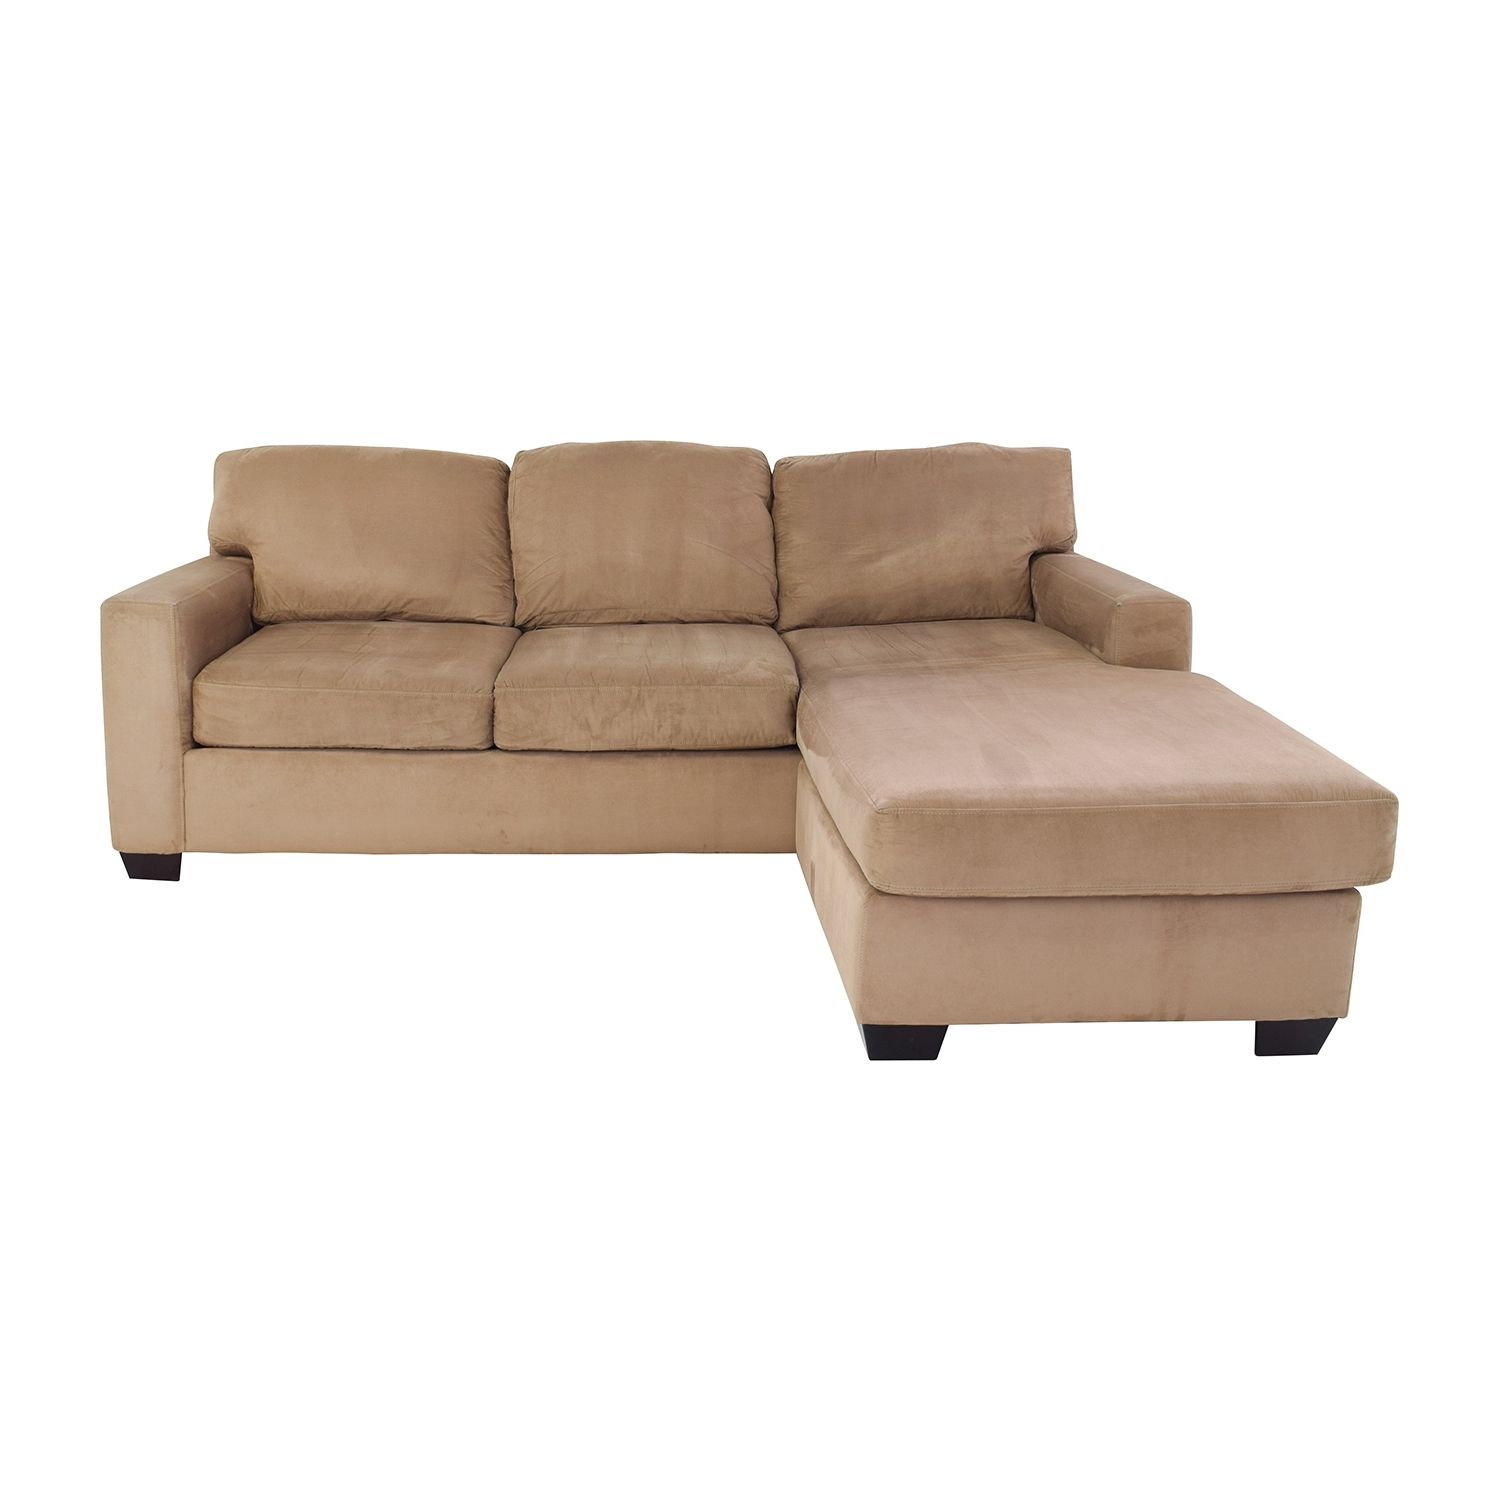 [%75% Off – Max Home Max Home Tan Sectional Chaise Sofa / Sofas For Best And Newest Tan Sectionals With Chaise|tan Sectionals With Chaise Inside Recent 75% Off – Max Home Max Home Tan Sectional Chaise Sofa / Sofas|2018 Tan Sectionals With Chaise For 75% Off – Max Home Max Home Tan Sectional Chaise Sofa / Sofas|well Known 75% Off – Max Home Max Home Tan Sectional Chaise Sofa / Sofas Inside Tan Sectionals With Chaise%] (View 1 of 15)